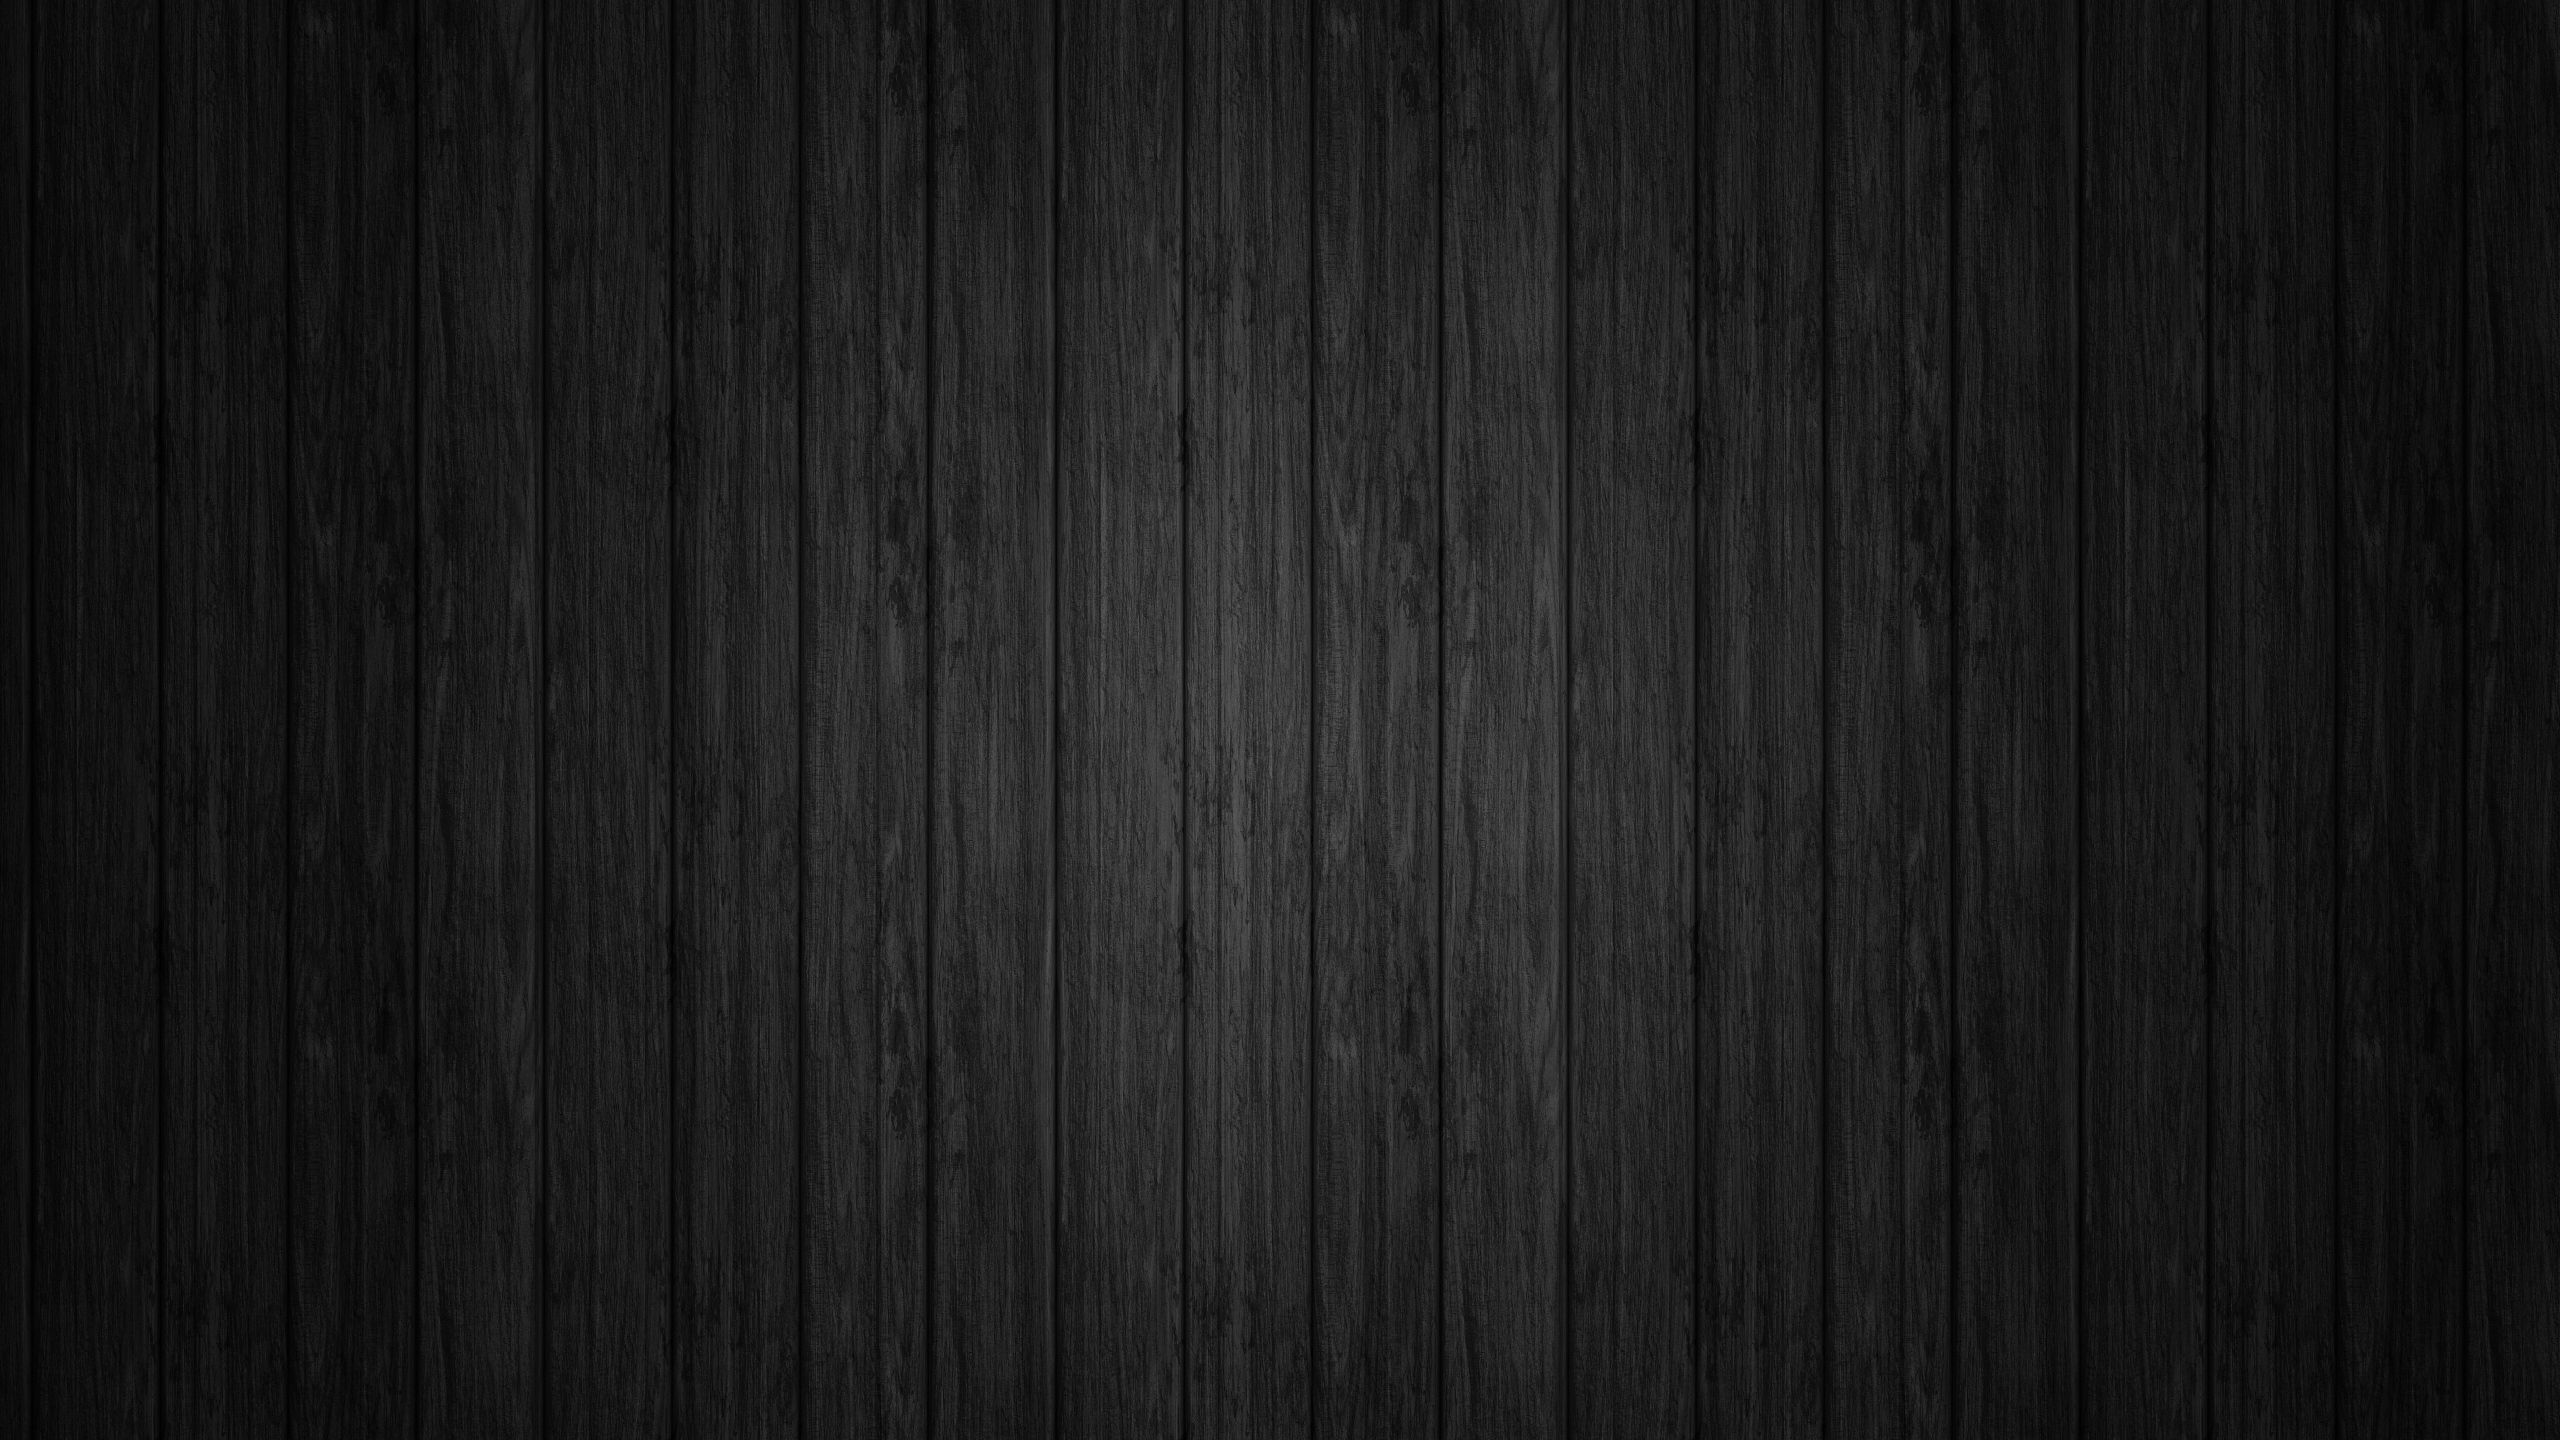 Download wallpaper 2560x1440 board, black, line, texture, background, wood  widescreen 16:9 hd background